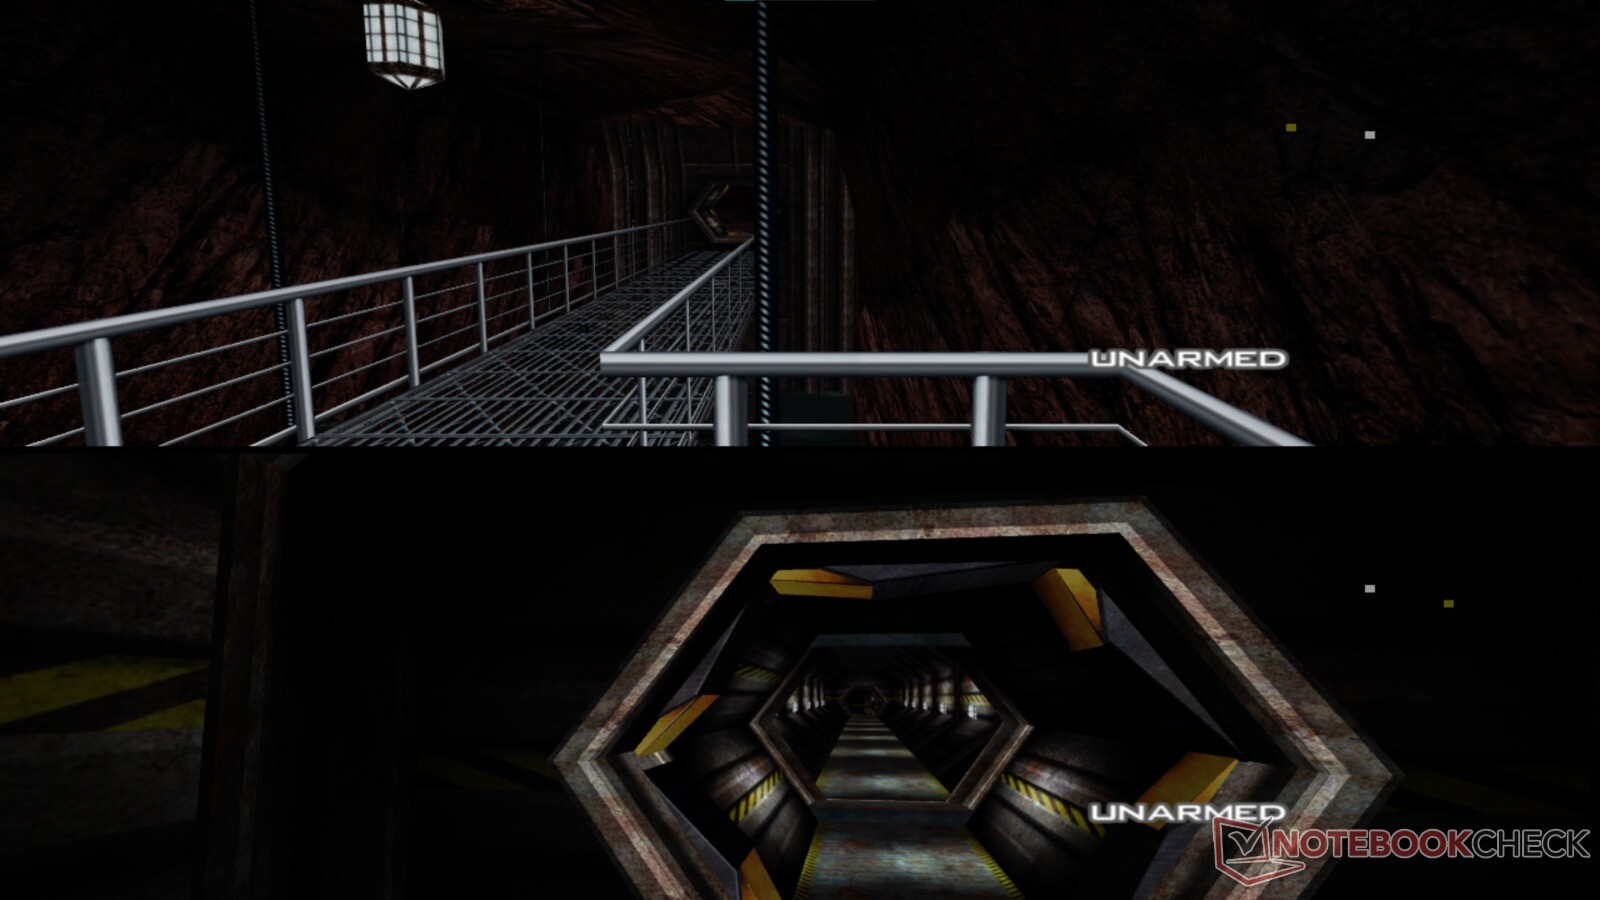 GoldenEye 007: Over 231 million downloads of leaked HD remaster show that  Rare still has a hit on its hands, 24 years on from the Nintendo 64 classic  -  News